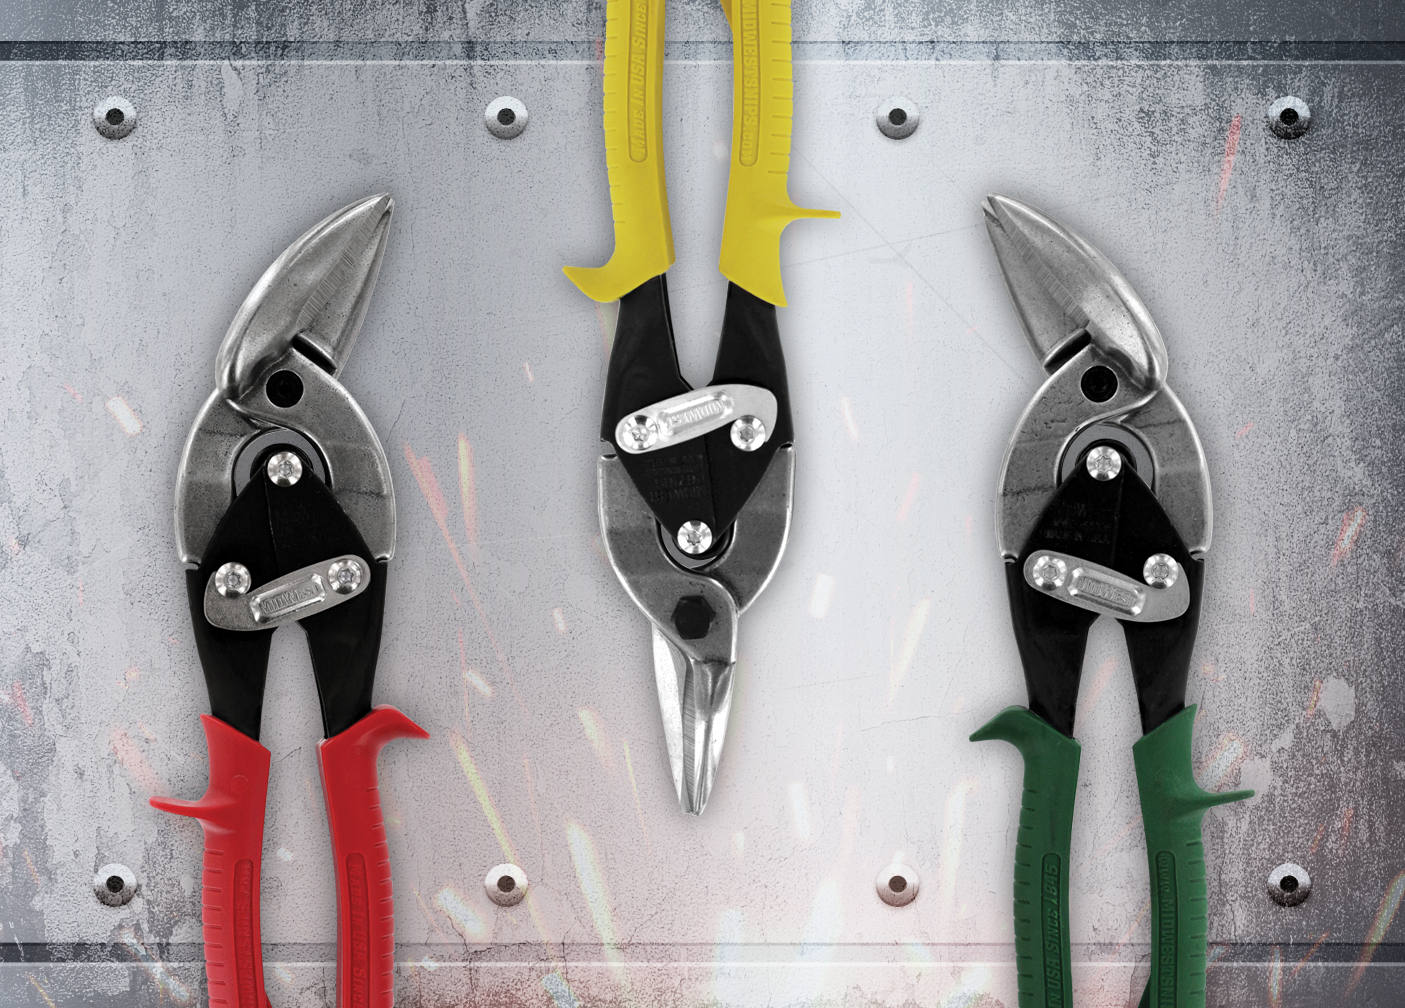 Midwest Snips Aviation Snips Tools